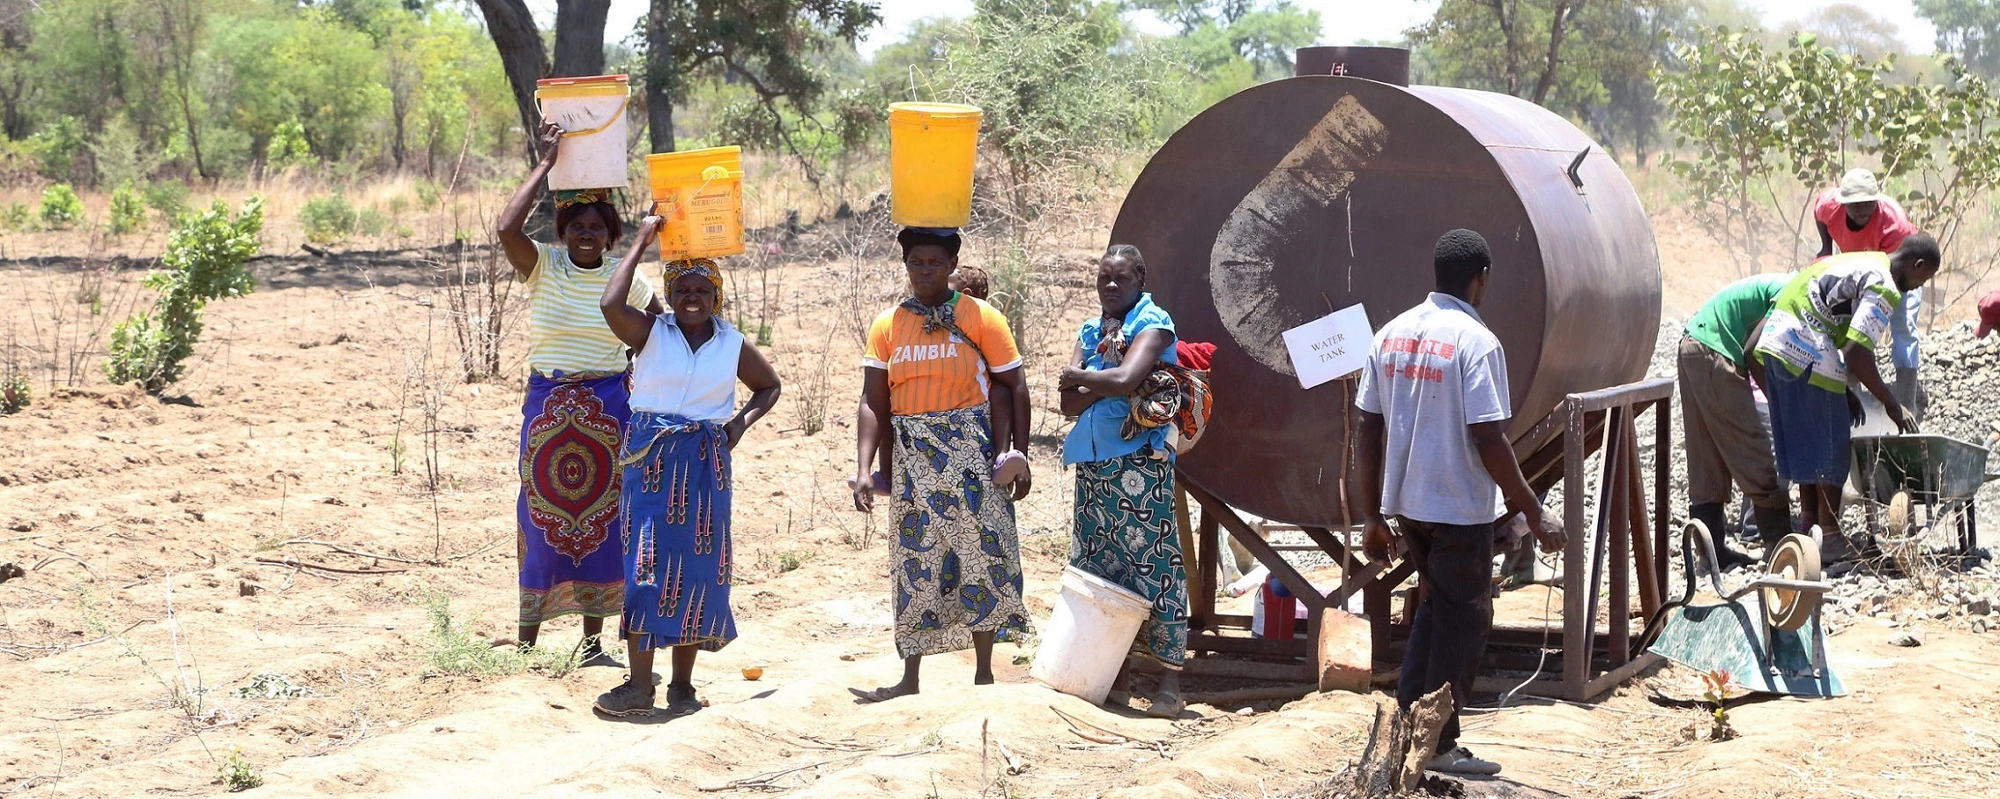 People fetching water from a water tank. Photo credit: Royd Sibajene